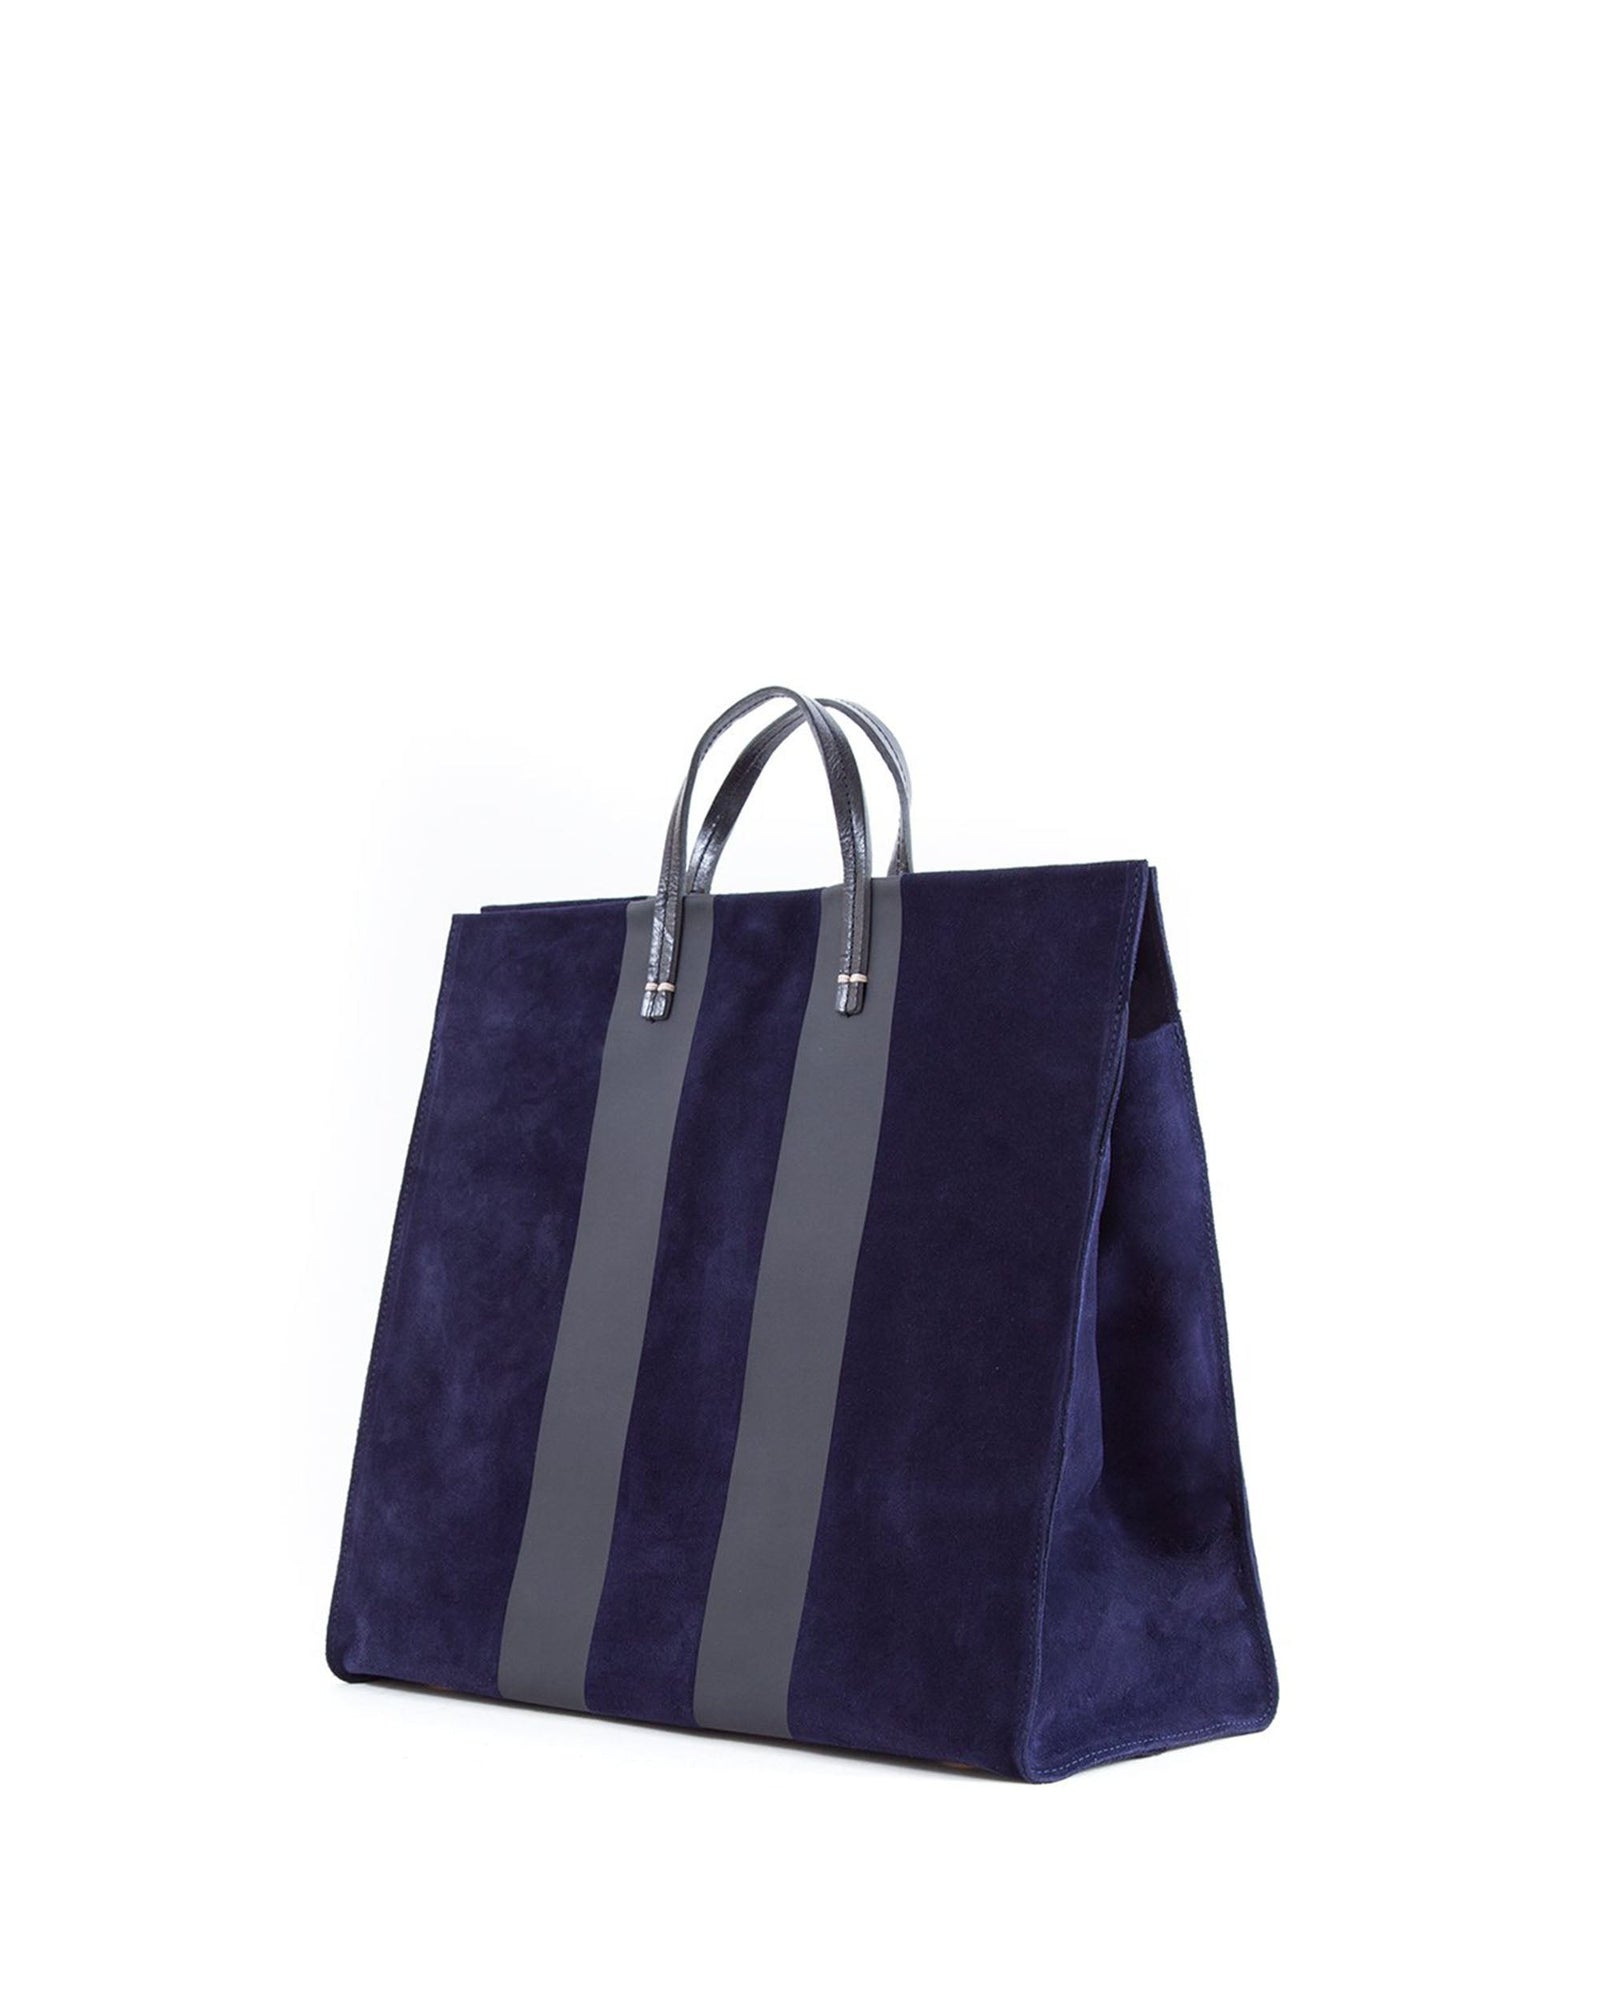 Simple Tote in Navy Suede with Racing Stripes - Back